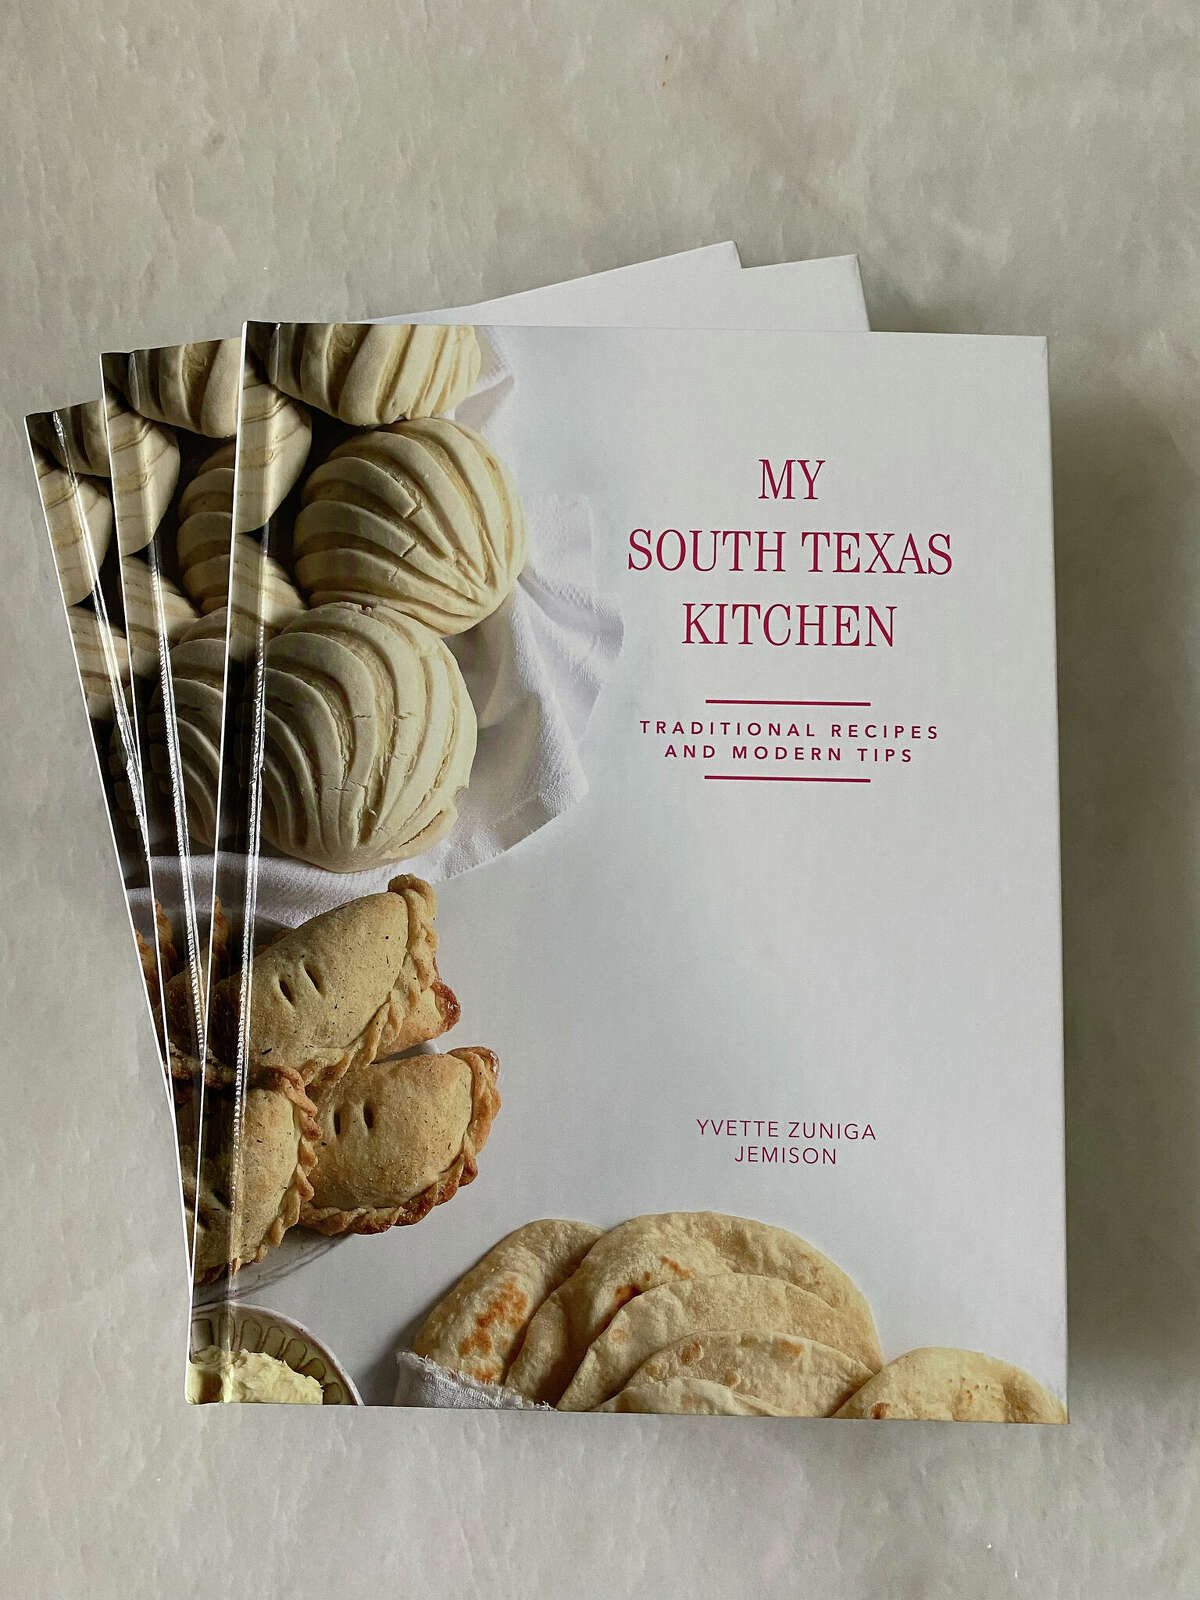 Yvette Zuniga Jemison recently published the cookbook "My South Texas Kitchen."